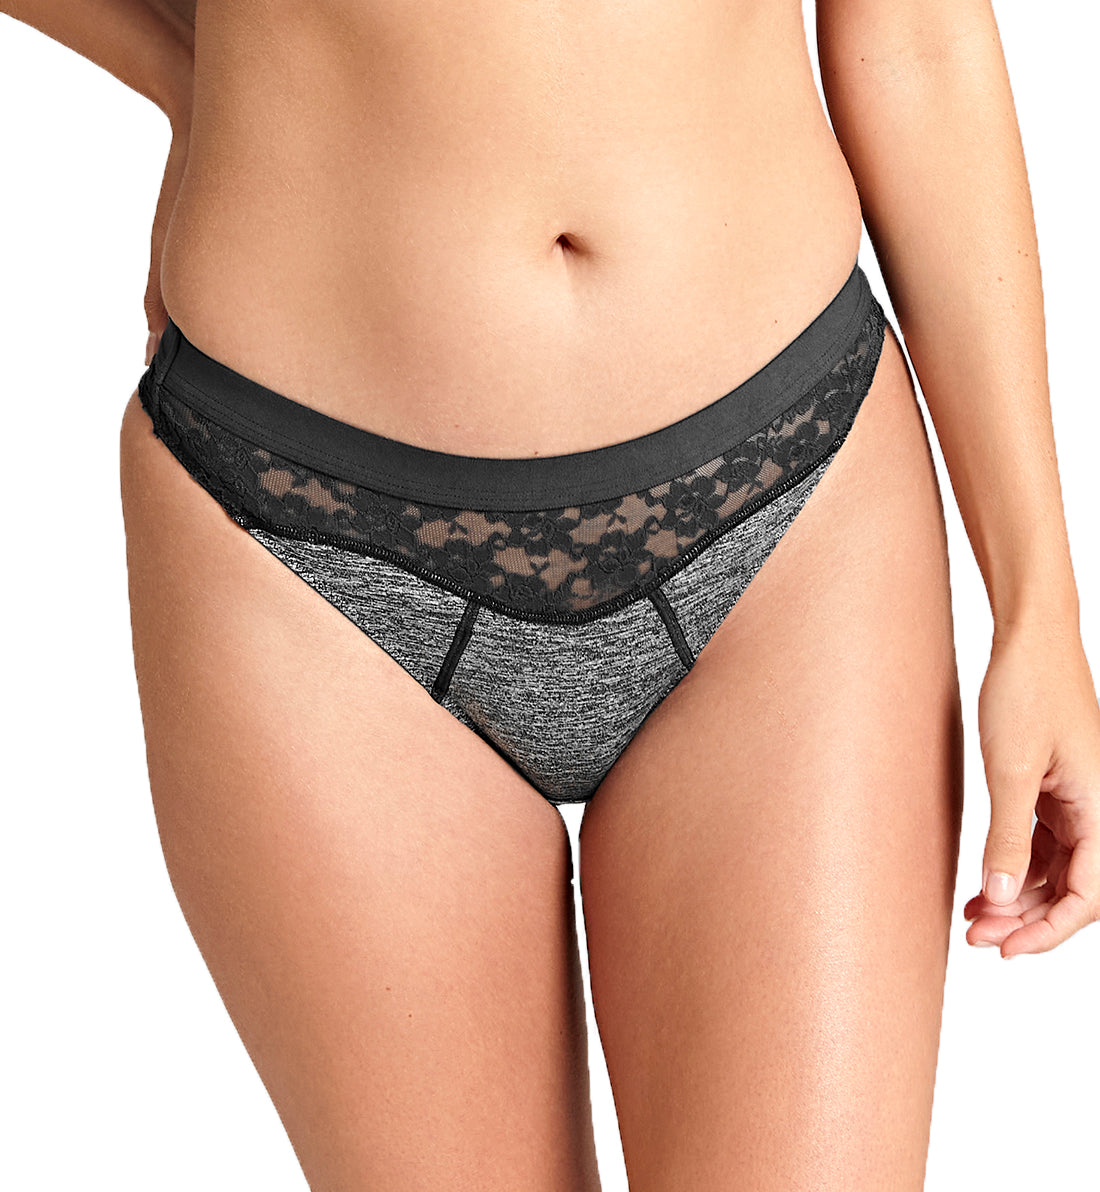 Cleo by Panache Freedom Brazilian Panty Brief (10322),Small,Charcoal - Charcoal,Small